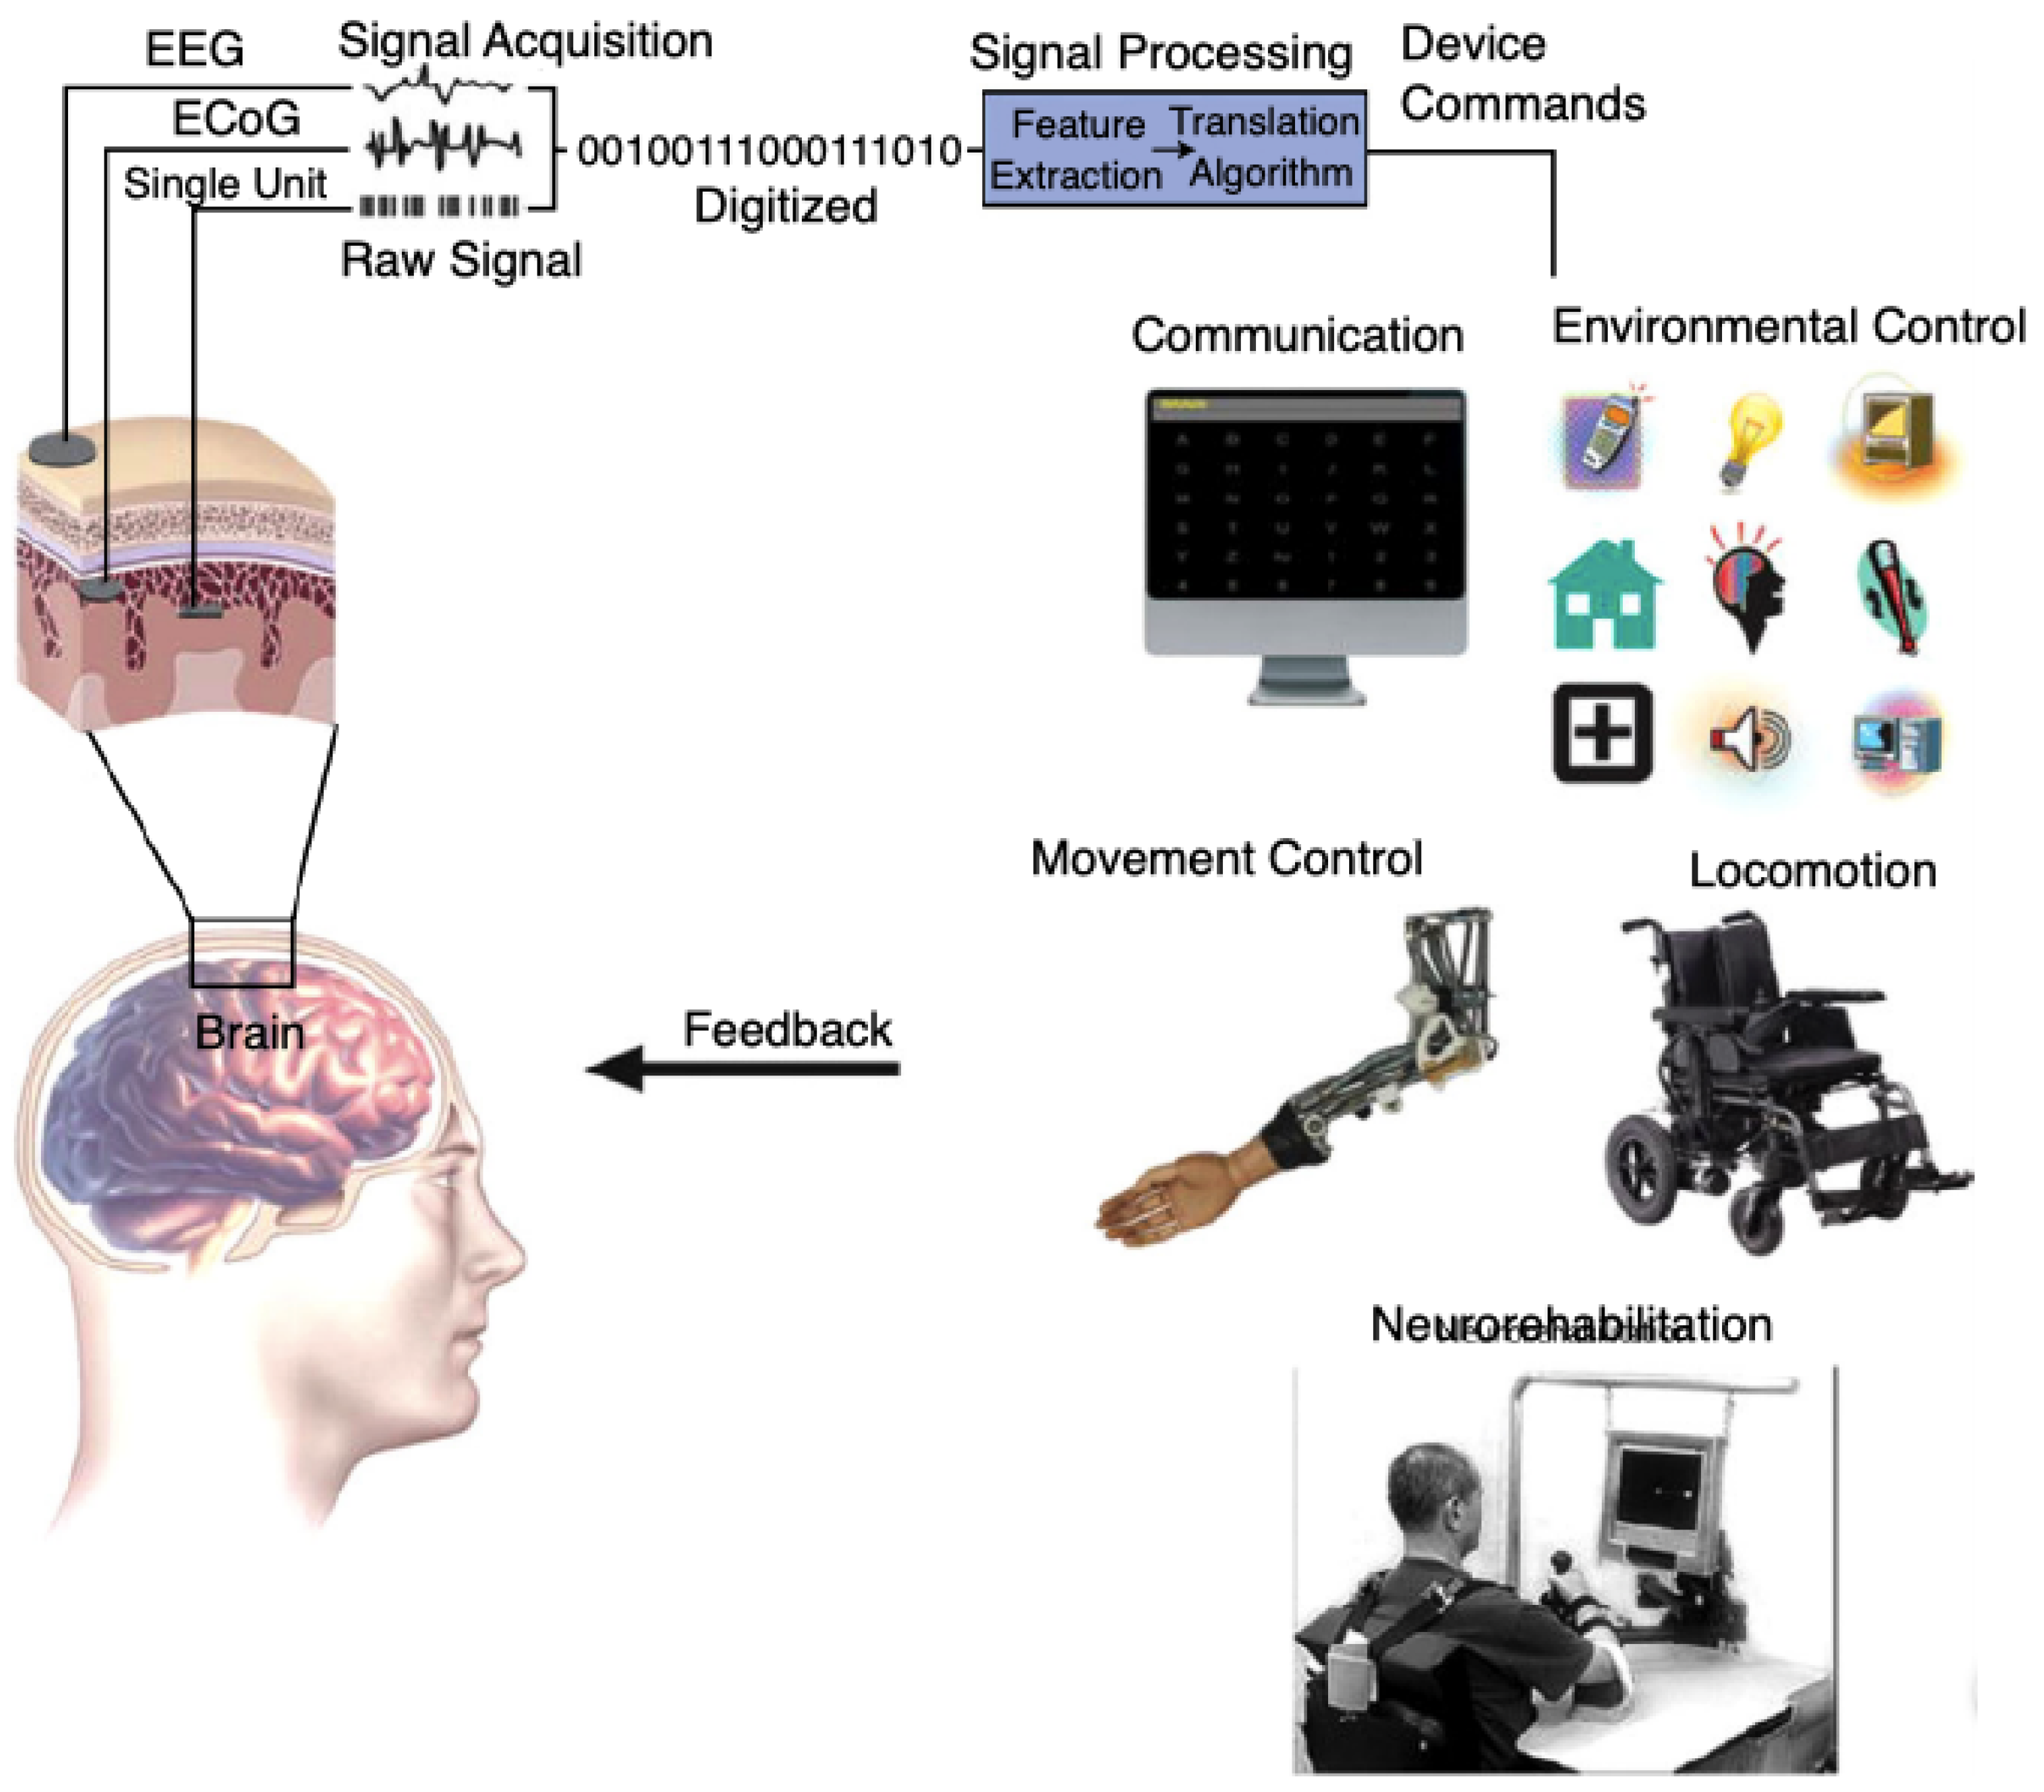 Simplified diagram of how most brain-computer interfaces function.